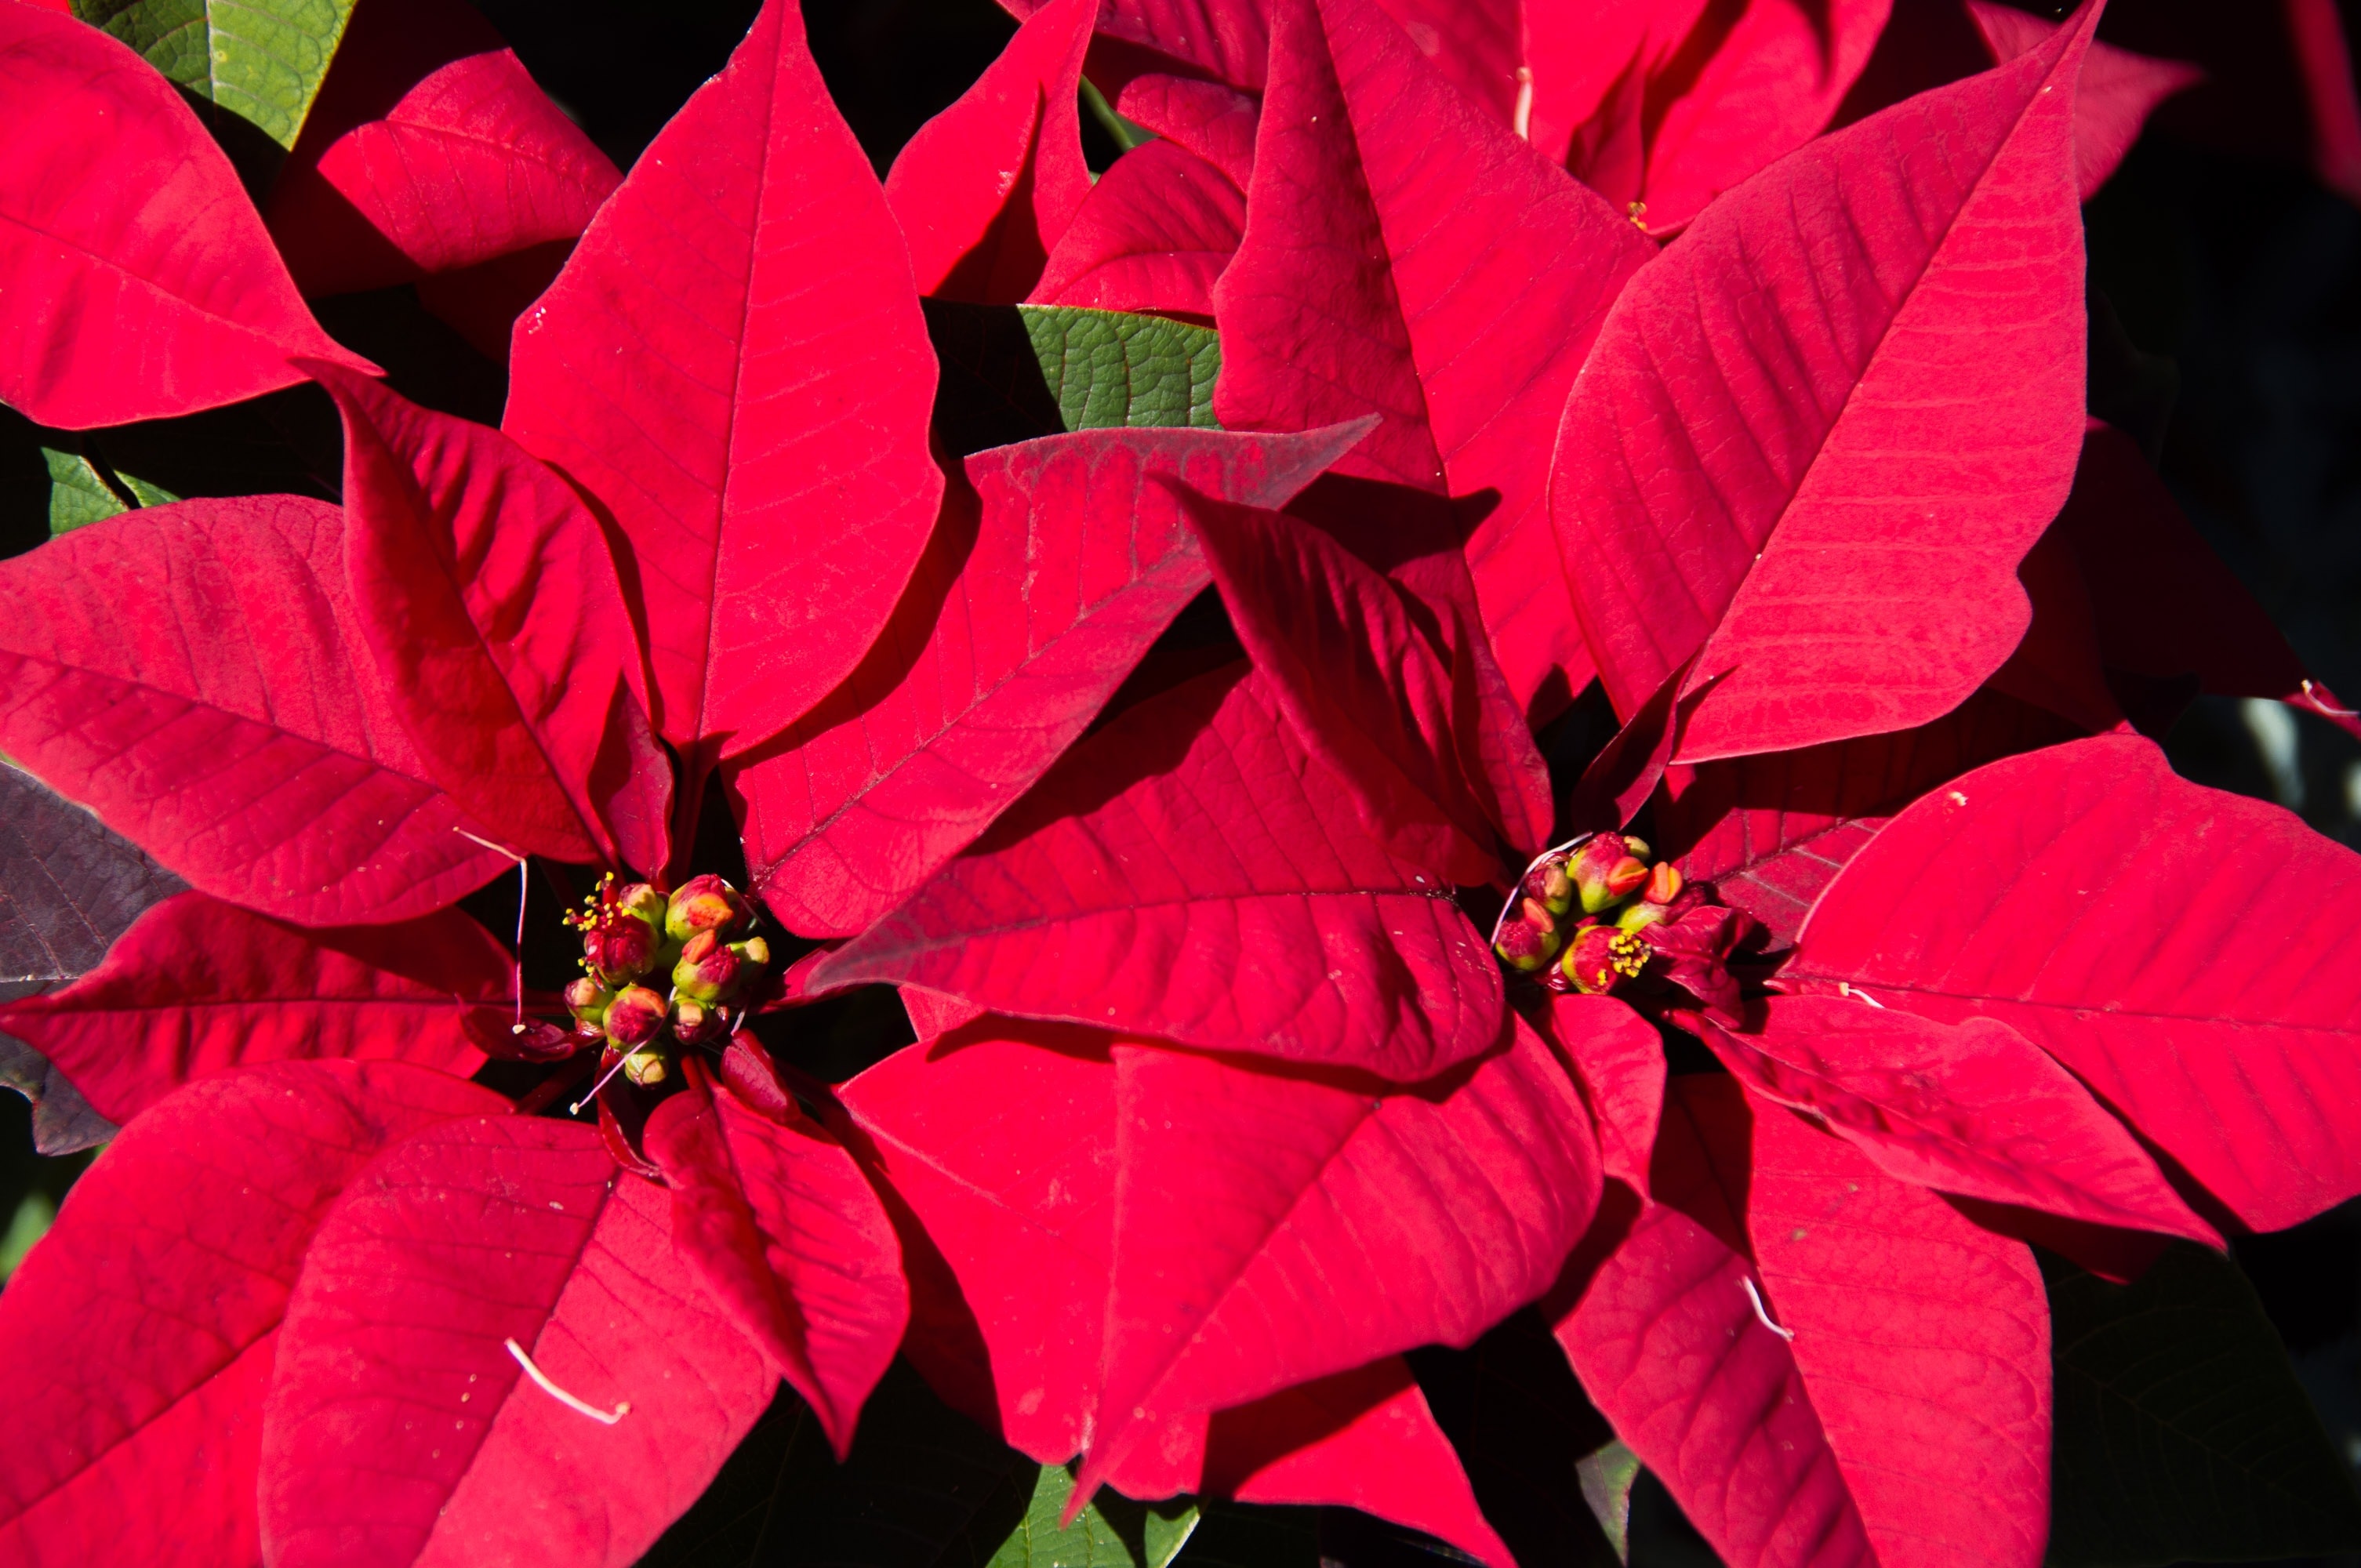 Leaves, Flowers, Red, Bright, Poinsettia, flower, red